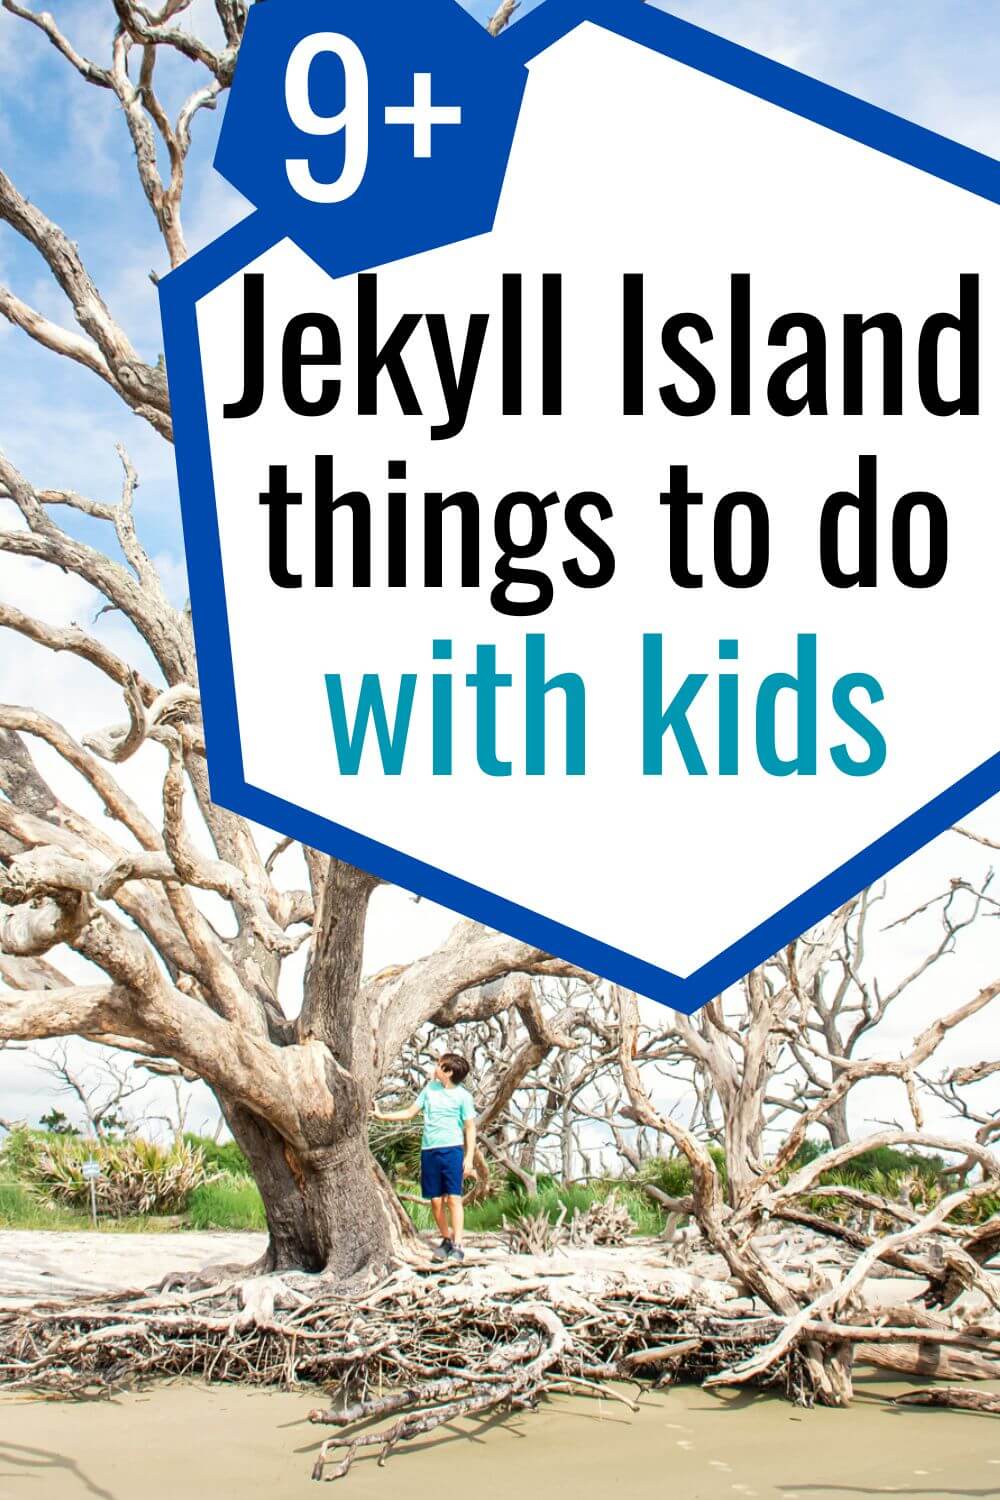 9+ Jekyll Island Things To Do With Kids